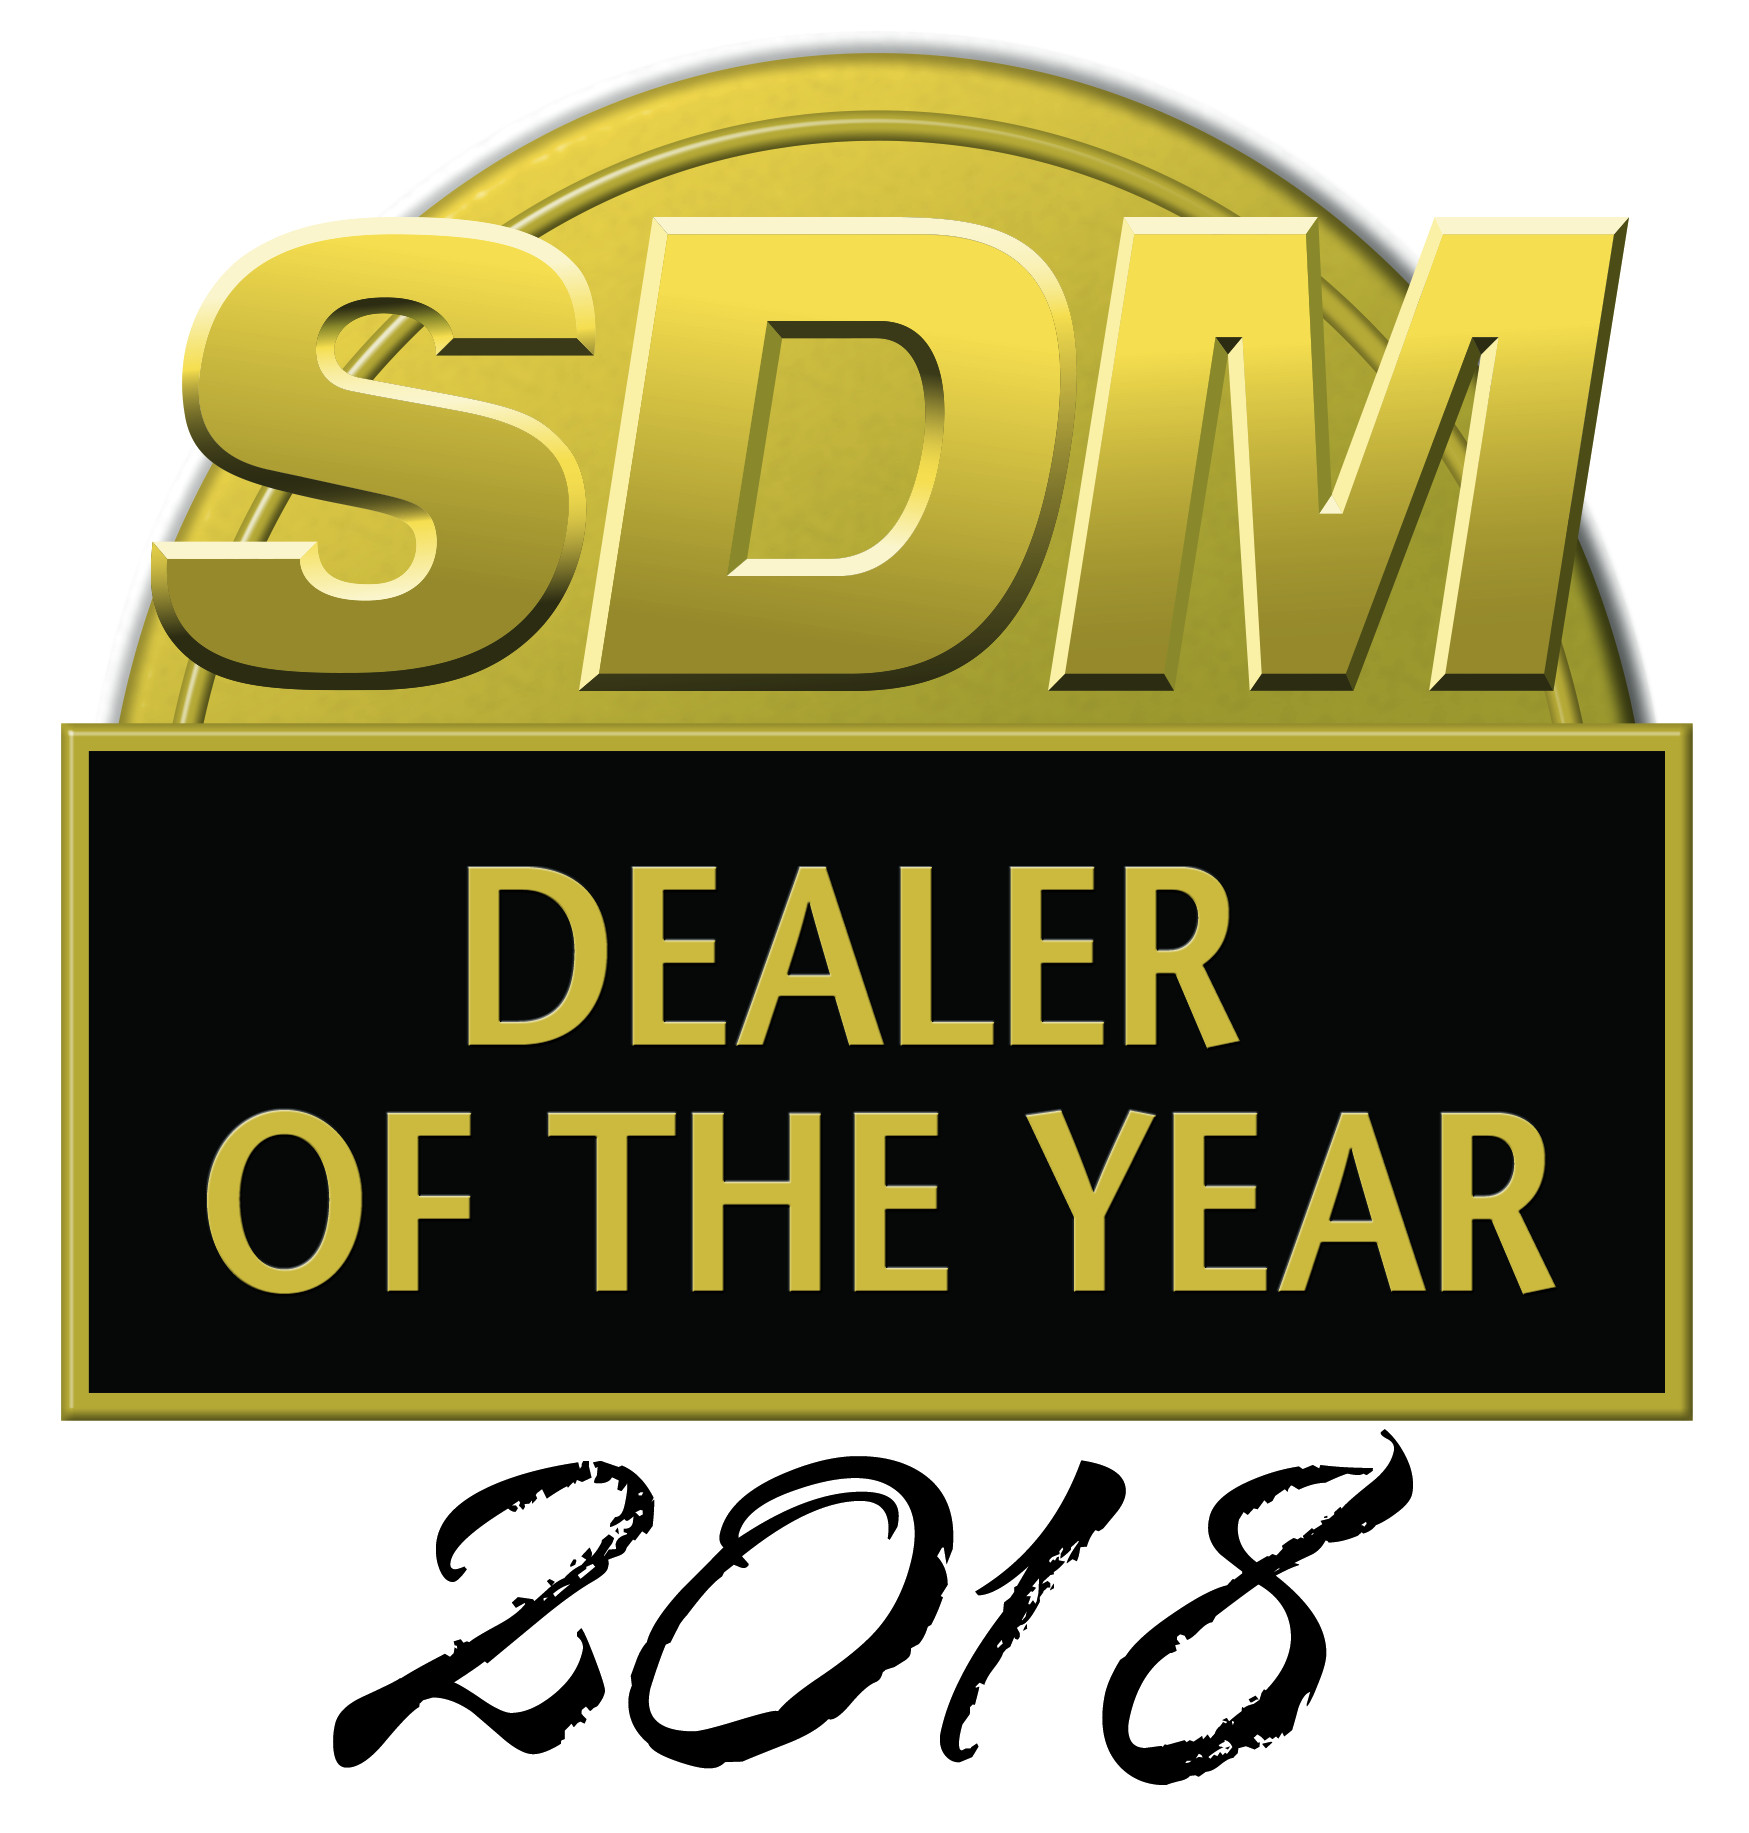 Dealer of the Year(2018)